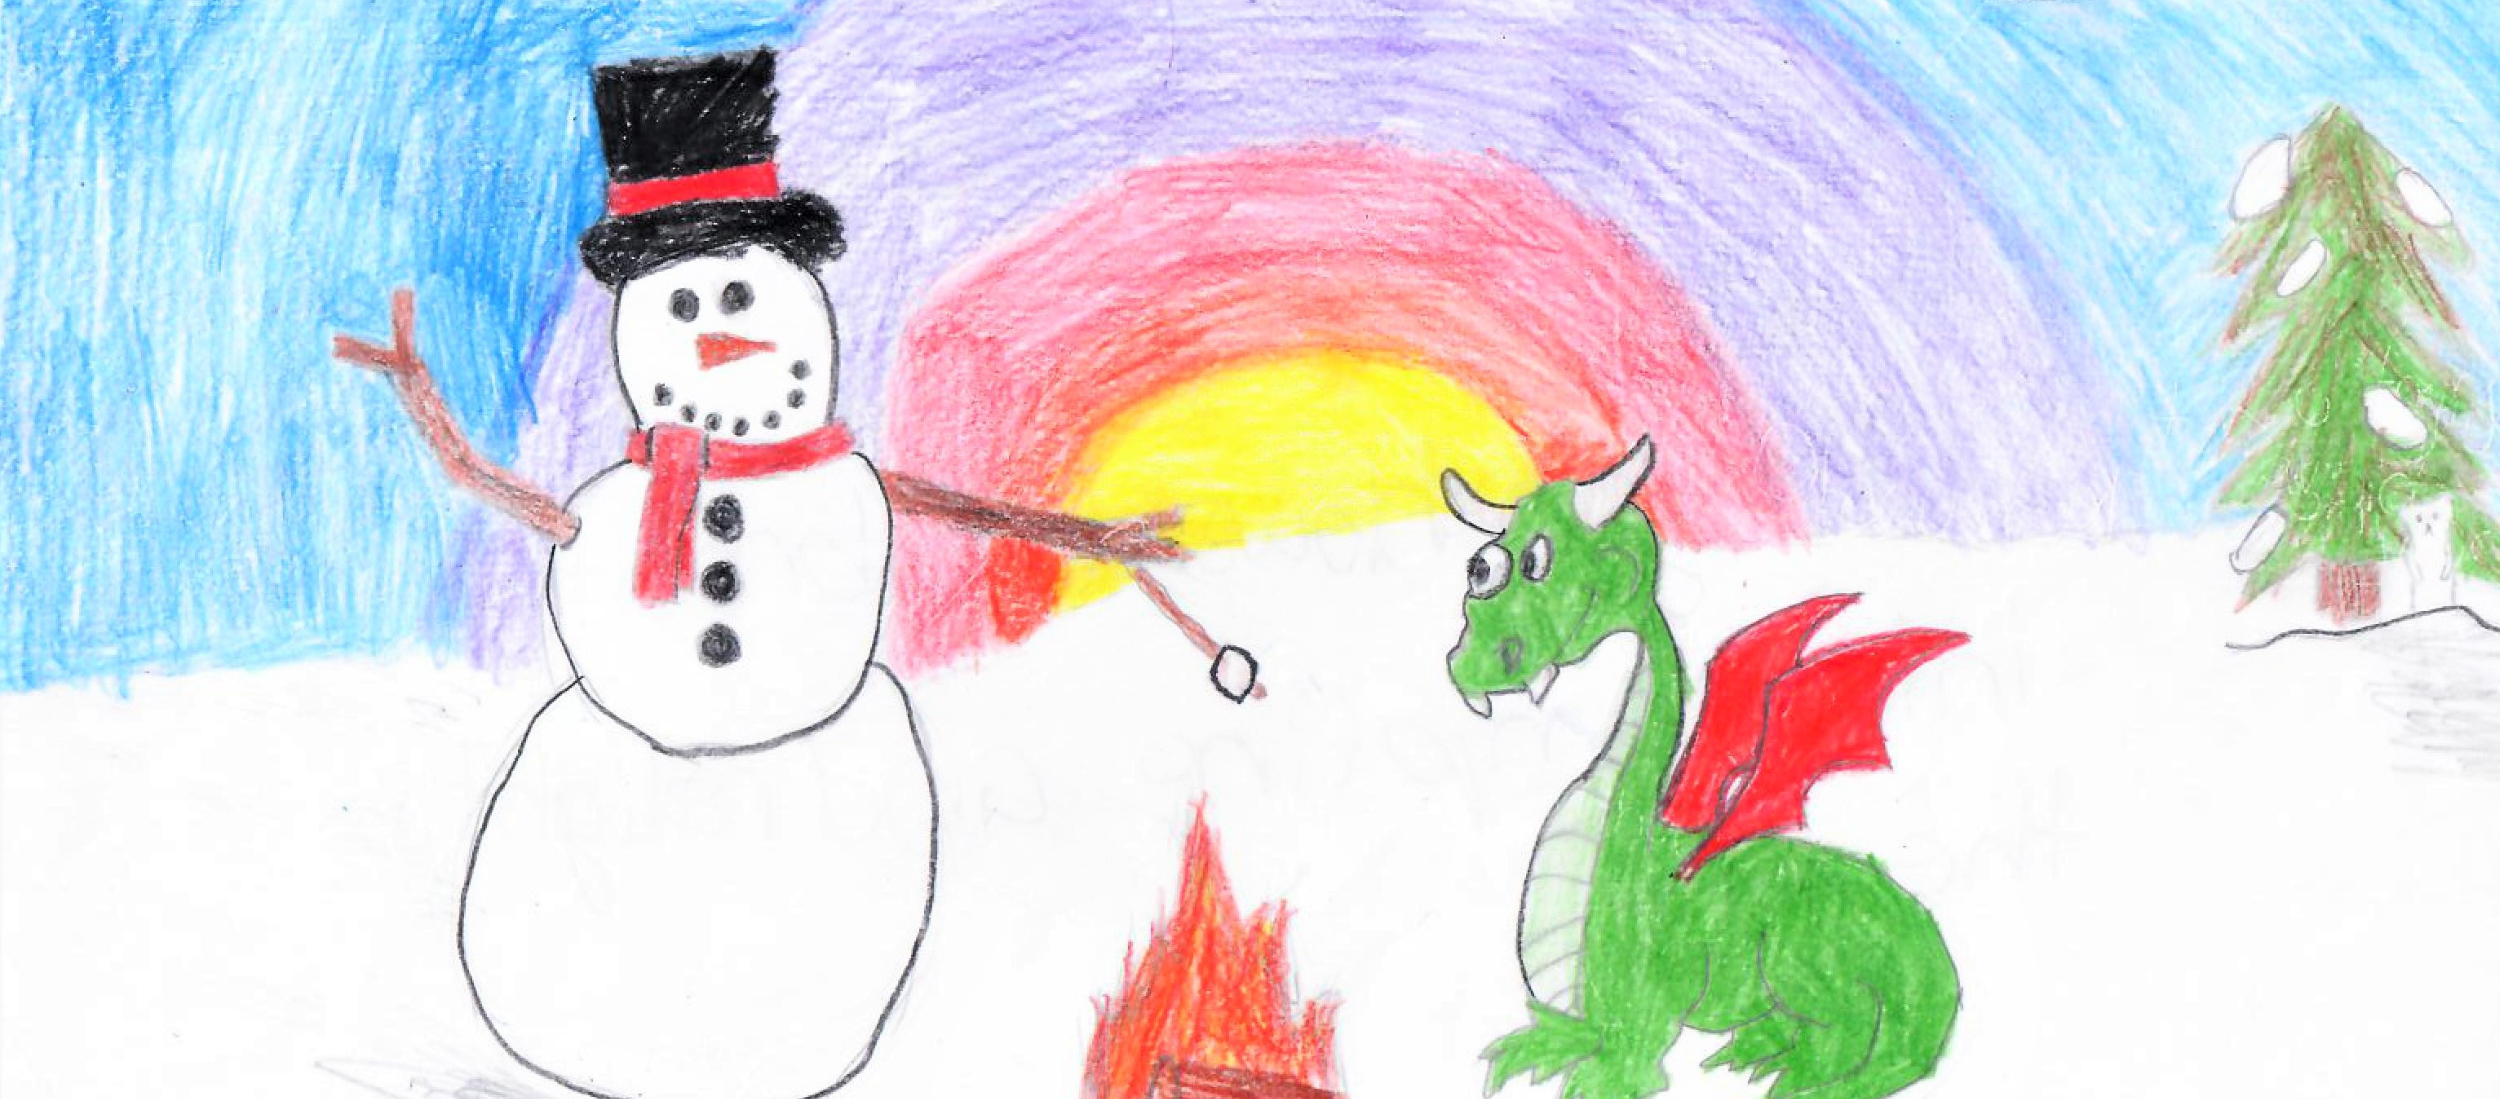 Meet the Winner of the Annual BTI Holiday Card Contest